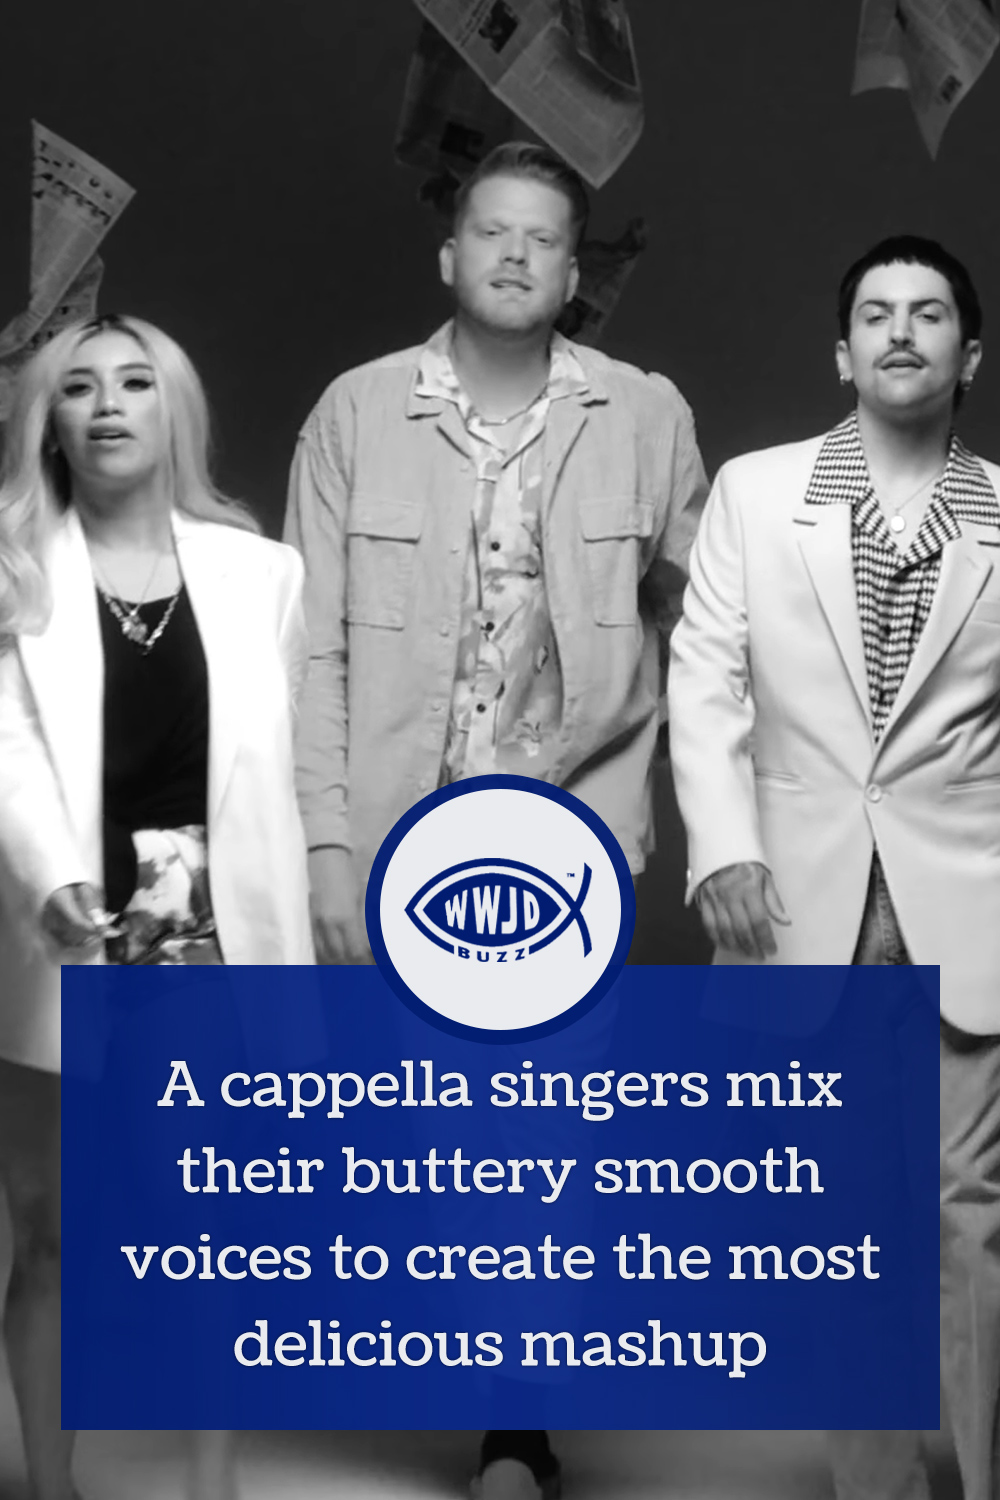 A cappella singers mix their buttery smooth voices to create the most delicious mashup